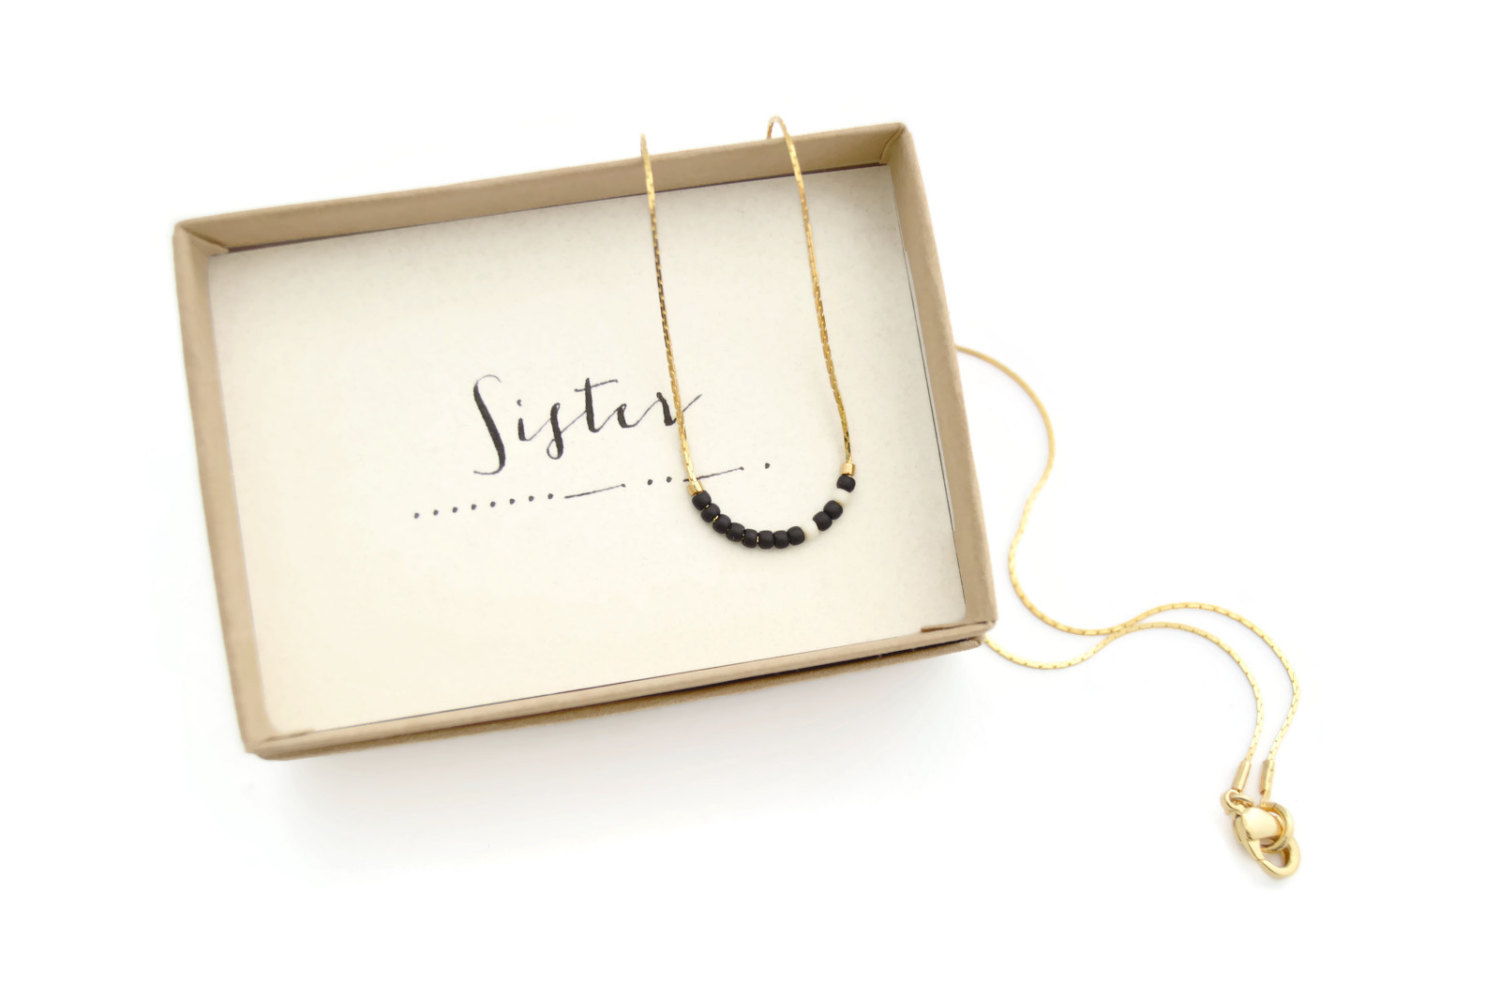 sister necklace and card gift morse code